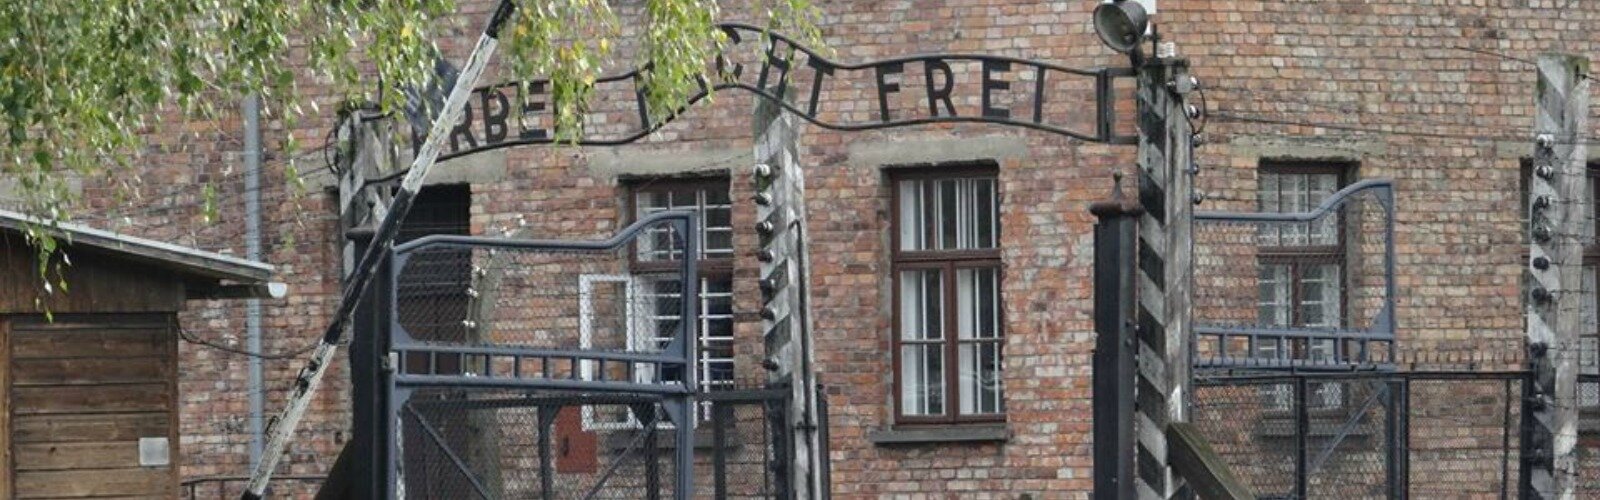 The sign at the entrance to Auschwitz translates to "work makes one free."  